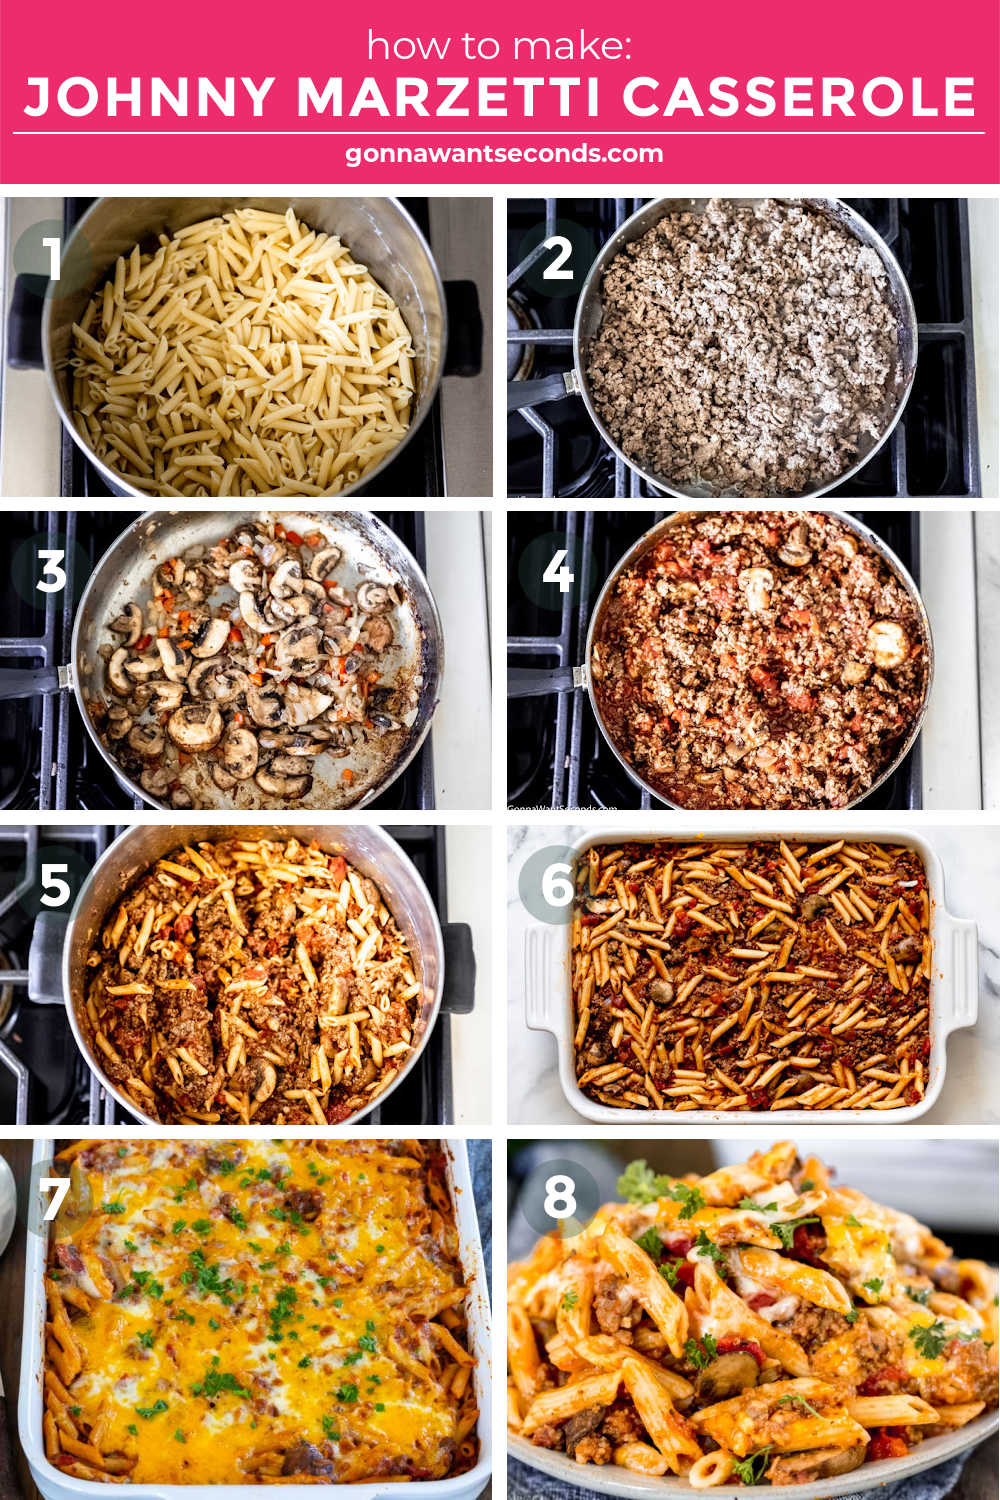 Step by step How to make Johnny Marzetti Casserole